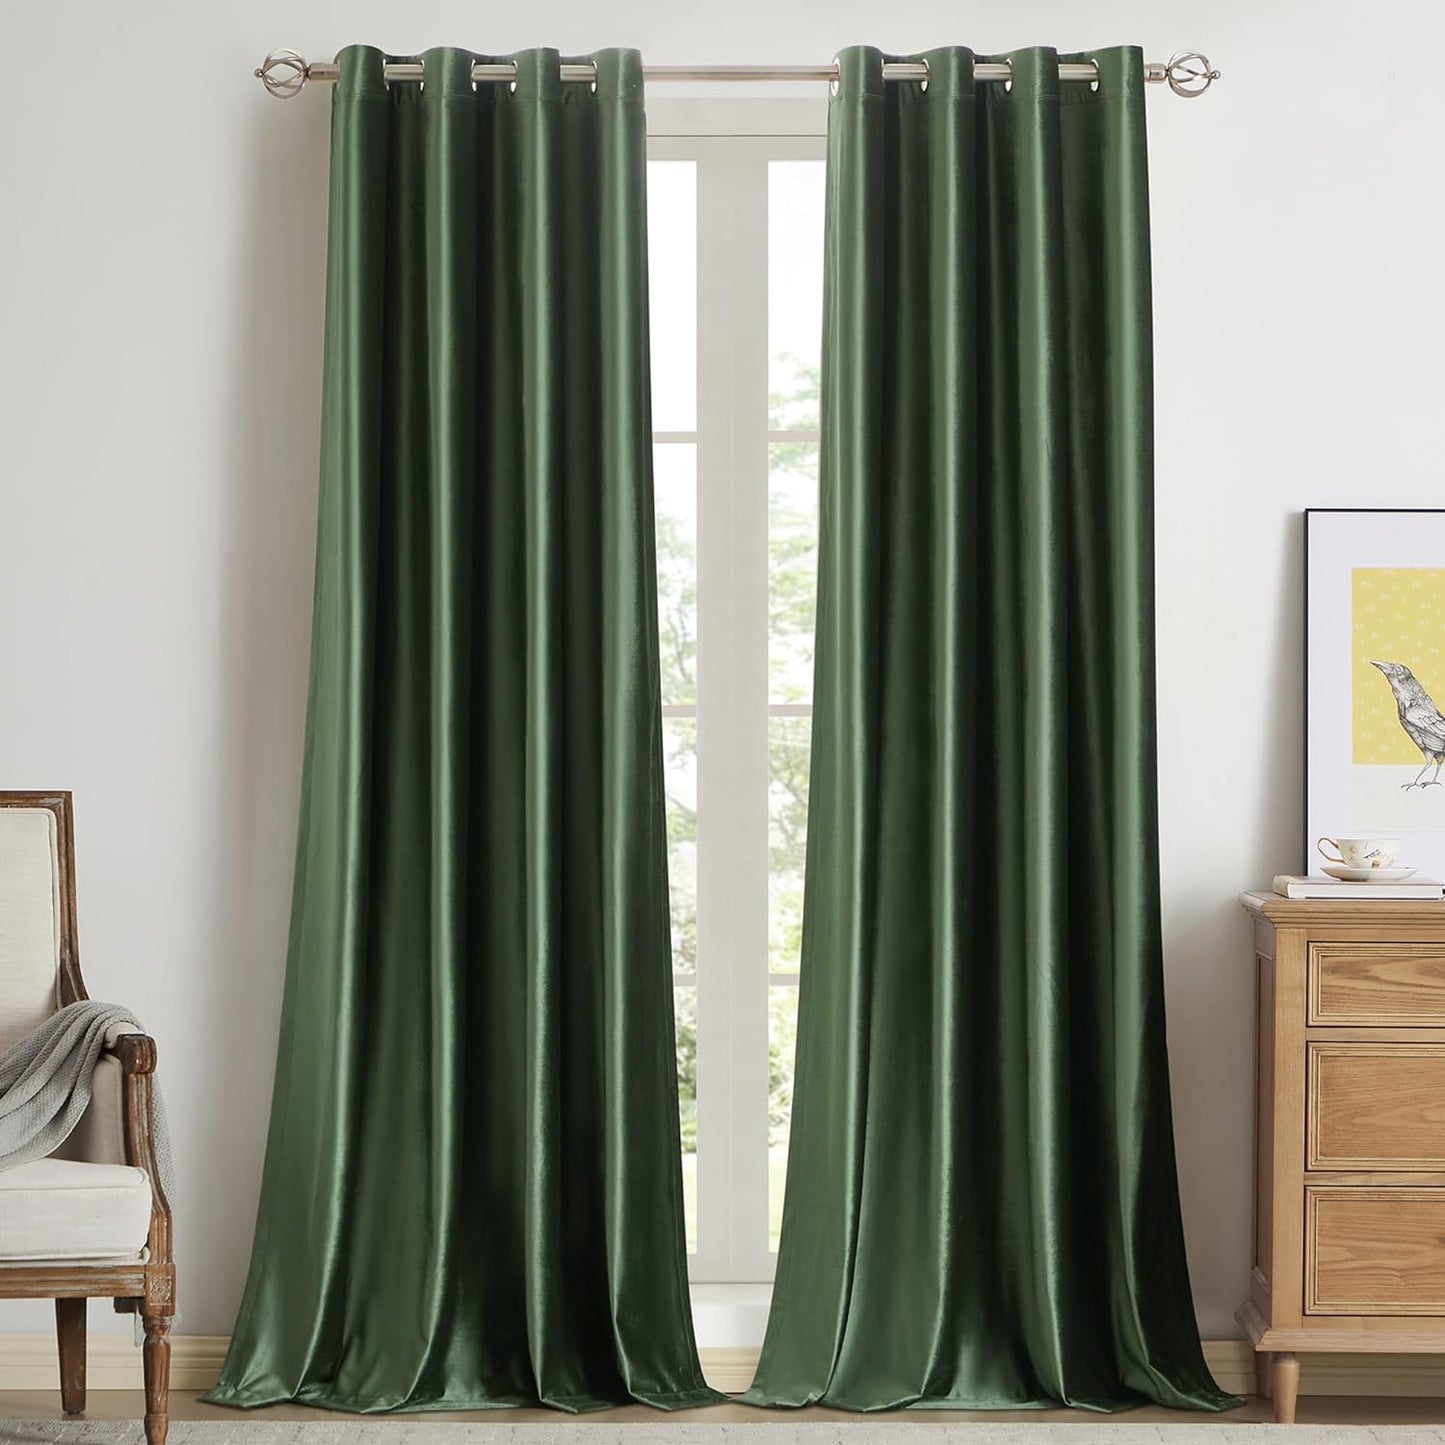 BULBUL Living Room Velvet Window Curtains 84 Inch Length- 2 Panels Hot Pink Blackout Window Drapes Curtains Thermal Insulated Room Darkening Decor Grommet Curtains for Bedroom  BULBUL Olive Green/Emerald Green 52"W X 108"L 